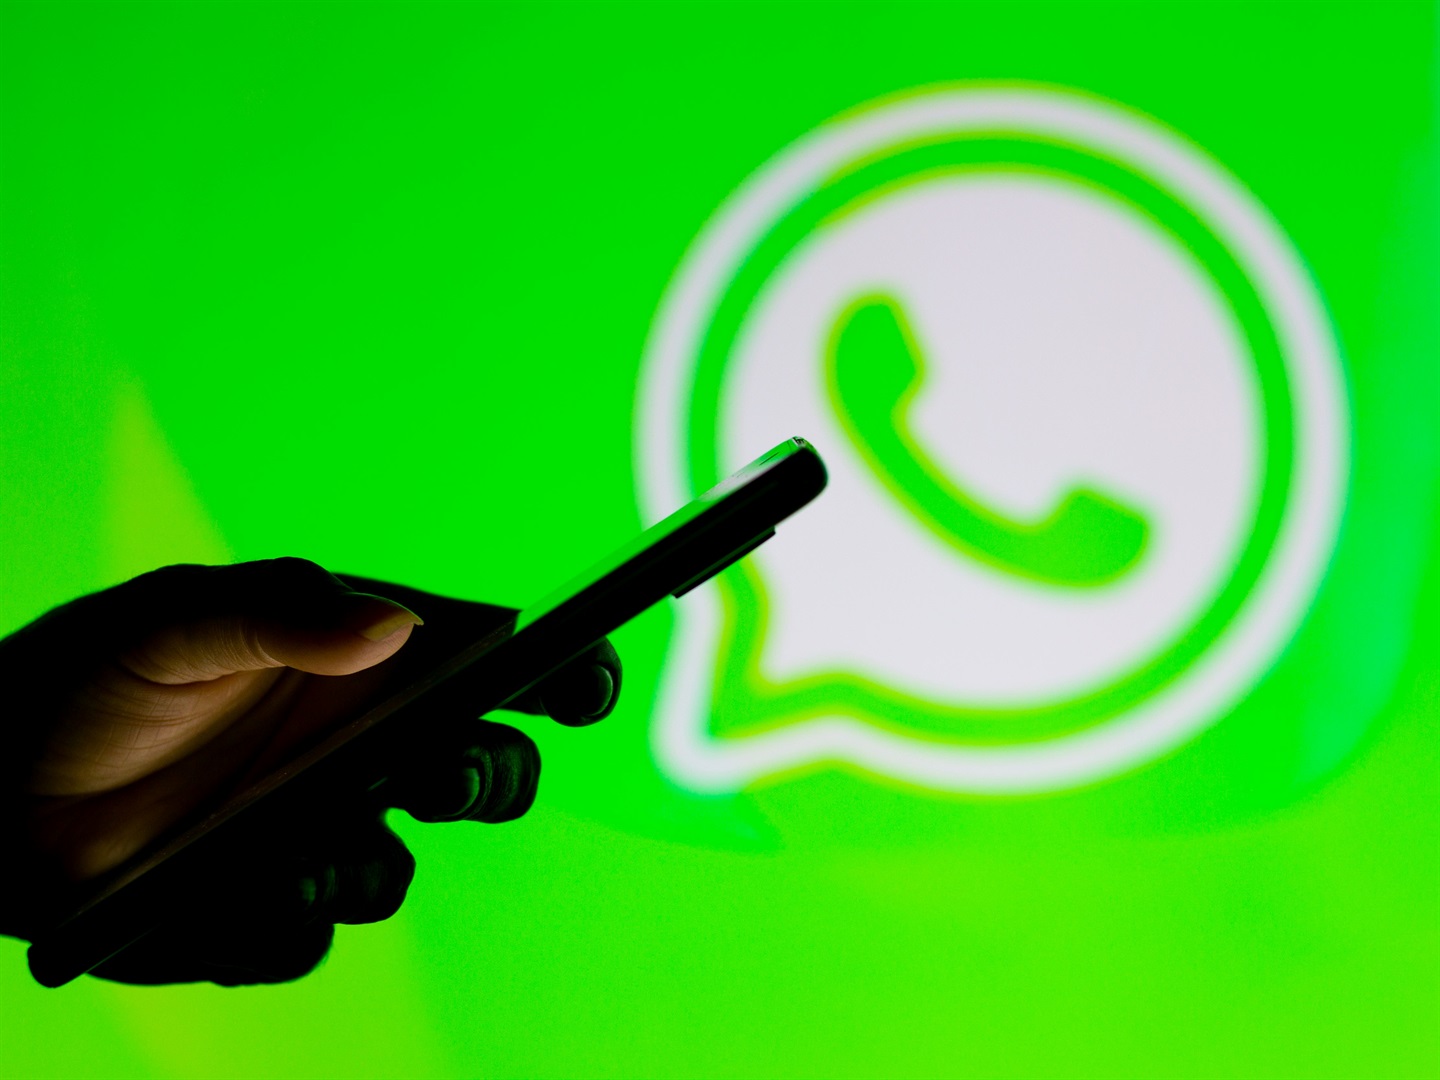  WhatsApp is rolling out a new feature that allows users to send higher quality images.